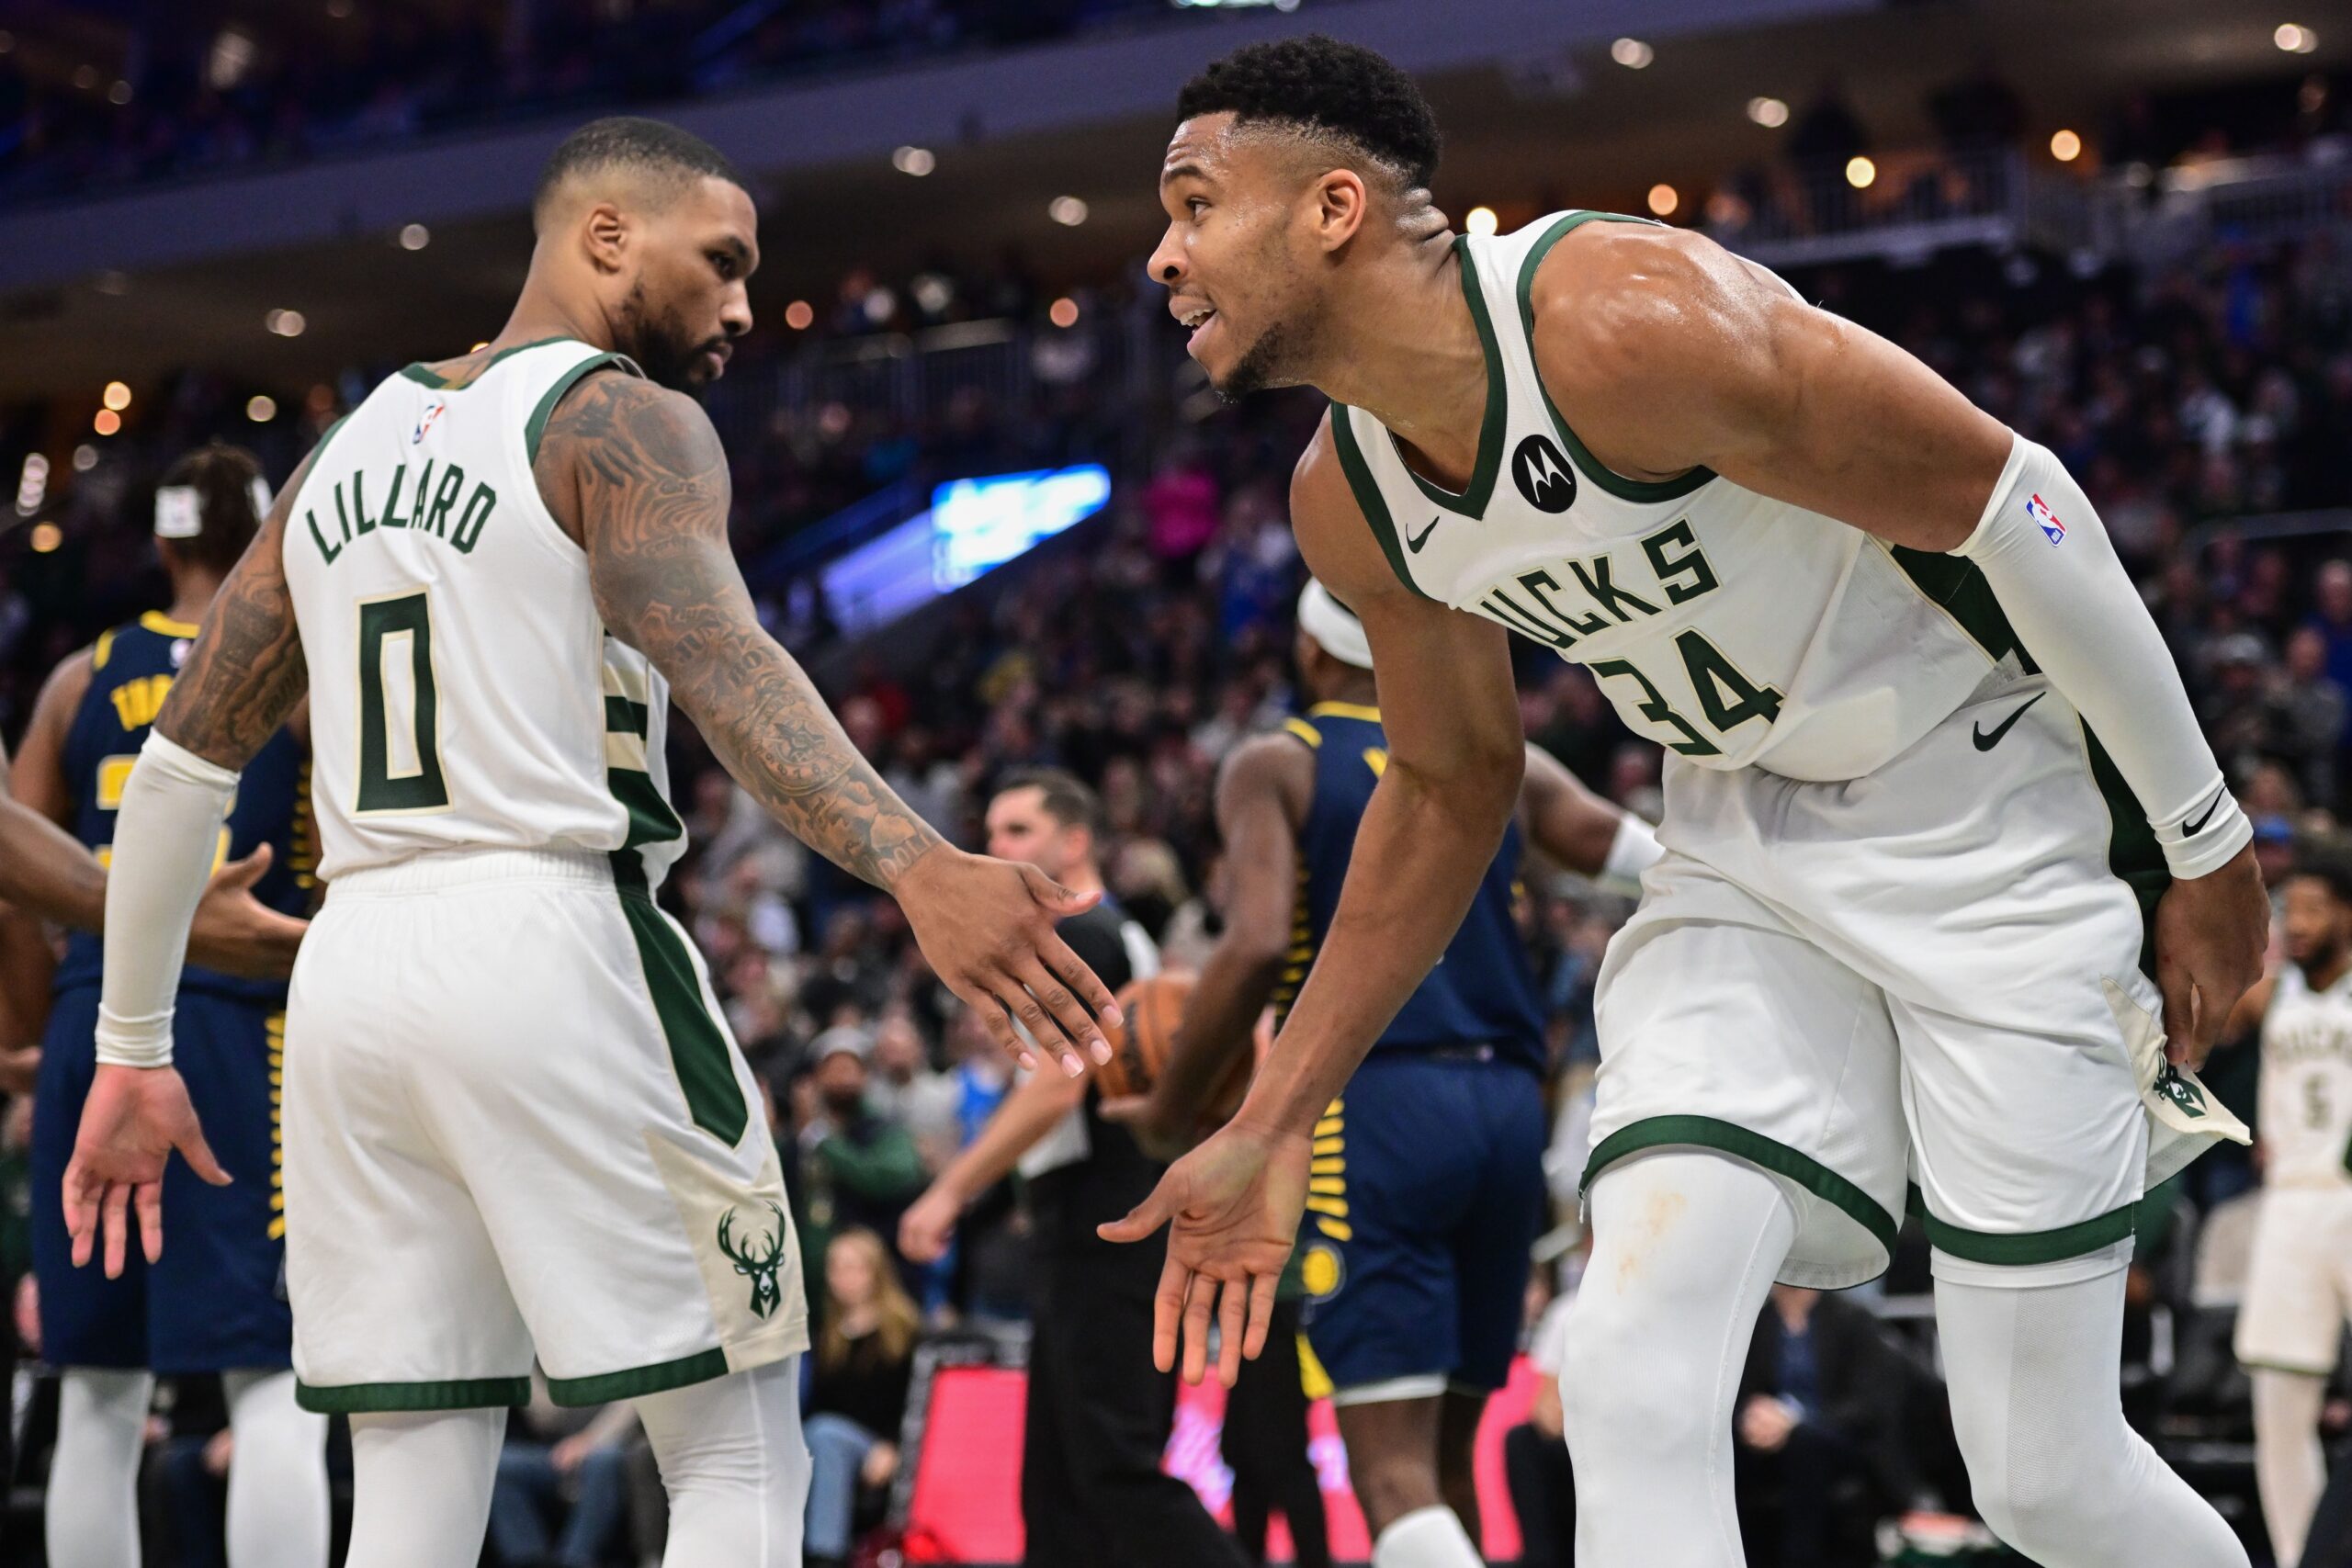 Giannis Antetokounmpo drops career-high 64 points as post-game